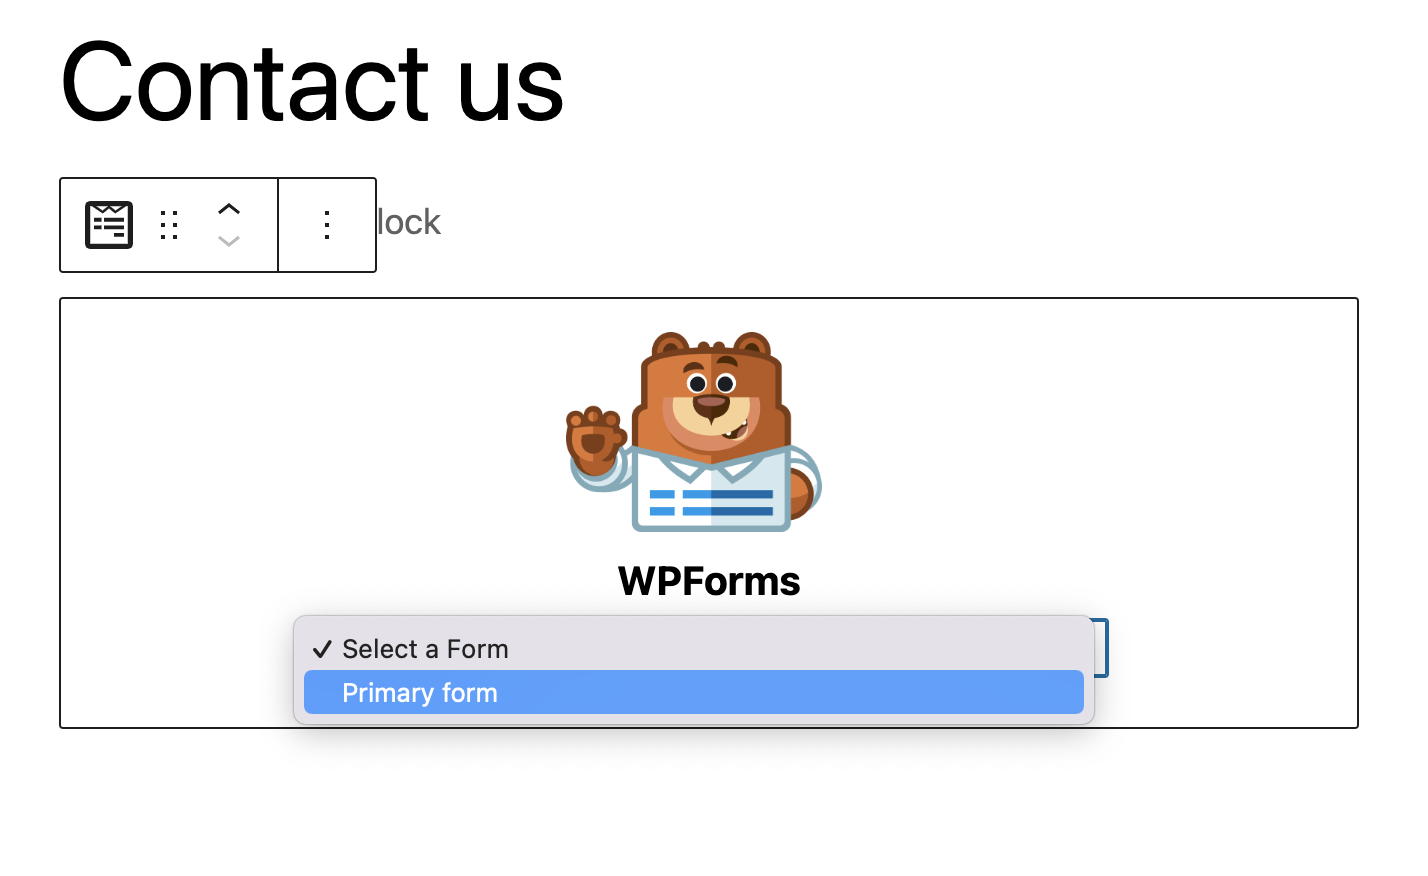 Select the form for the contact form block in WordPress